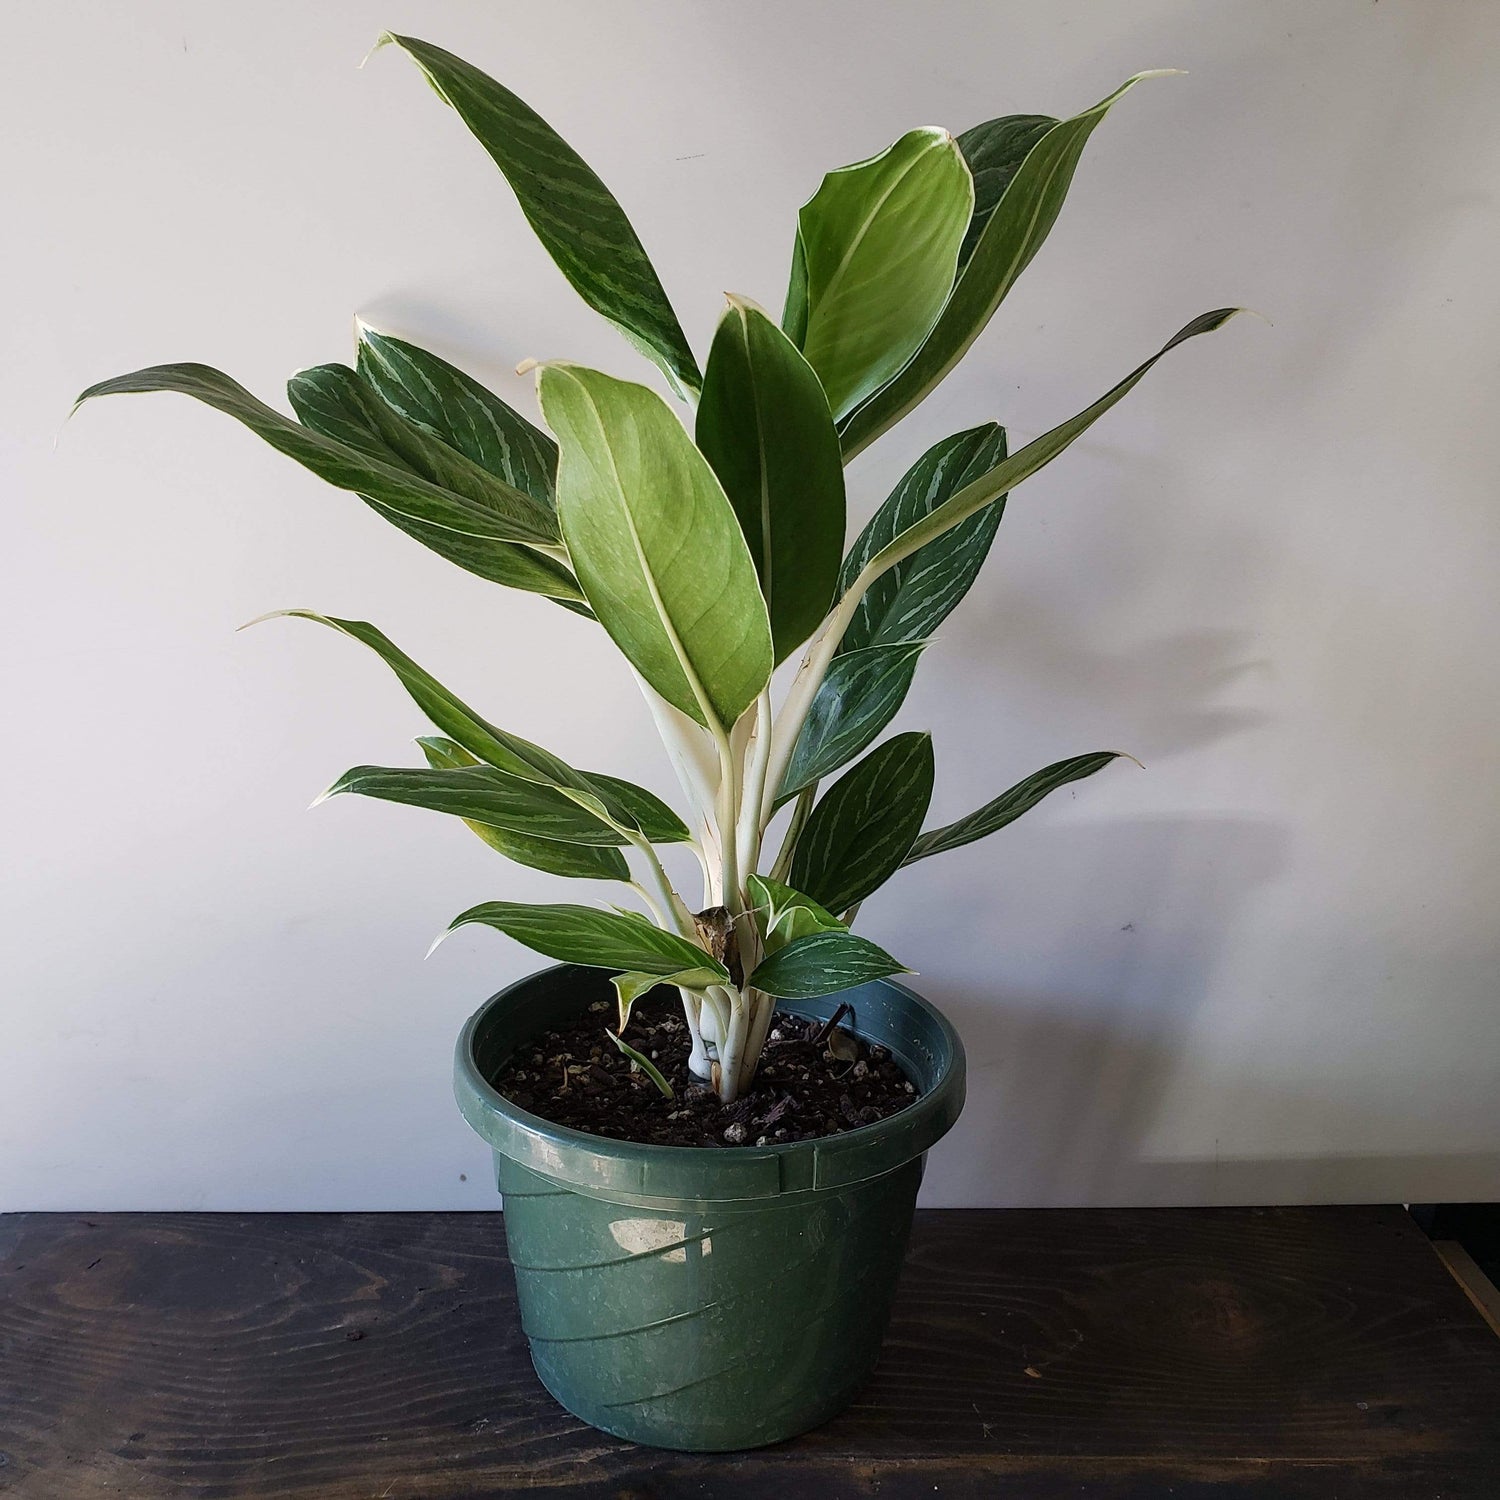 Urban Sprouts Plant 8" in nursery pot Chinese Evergreen 'Snow White'